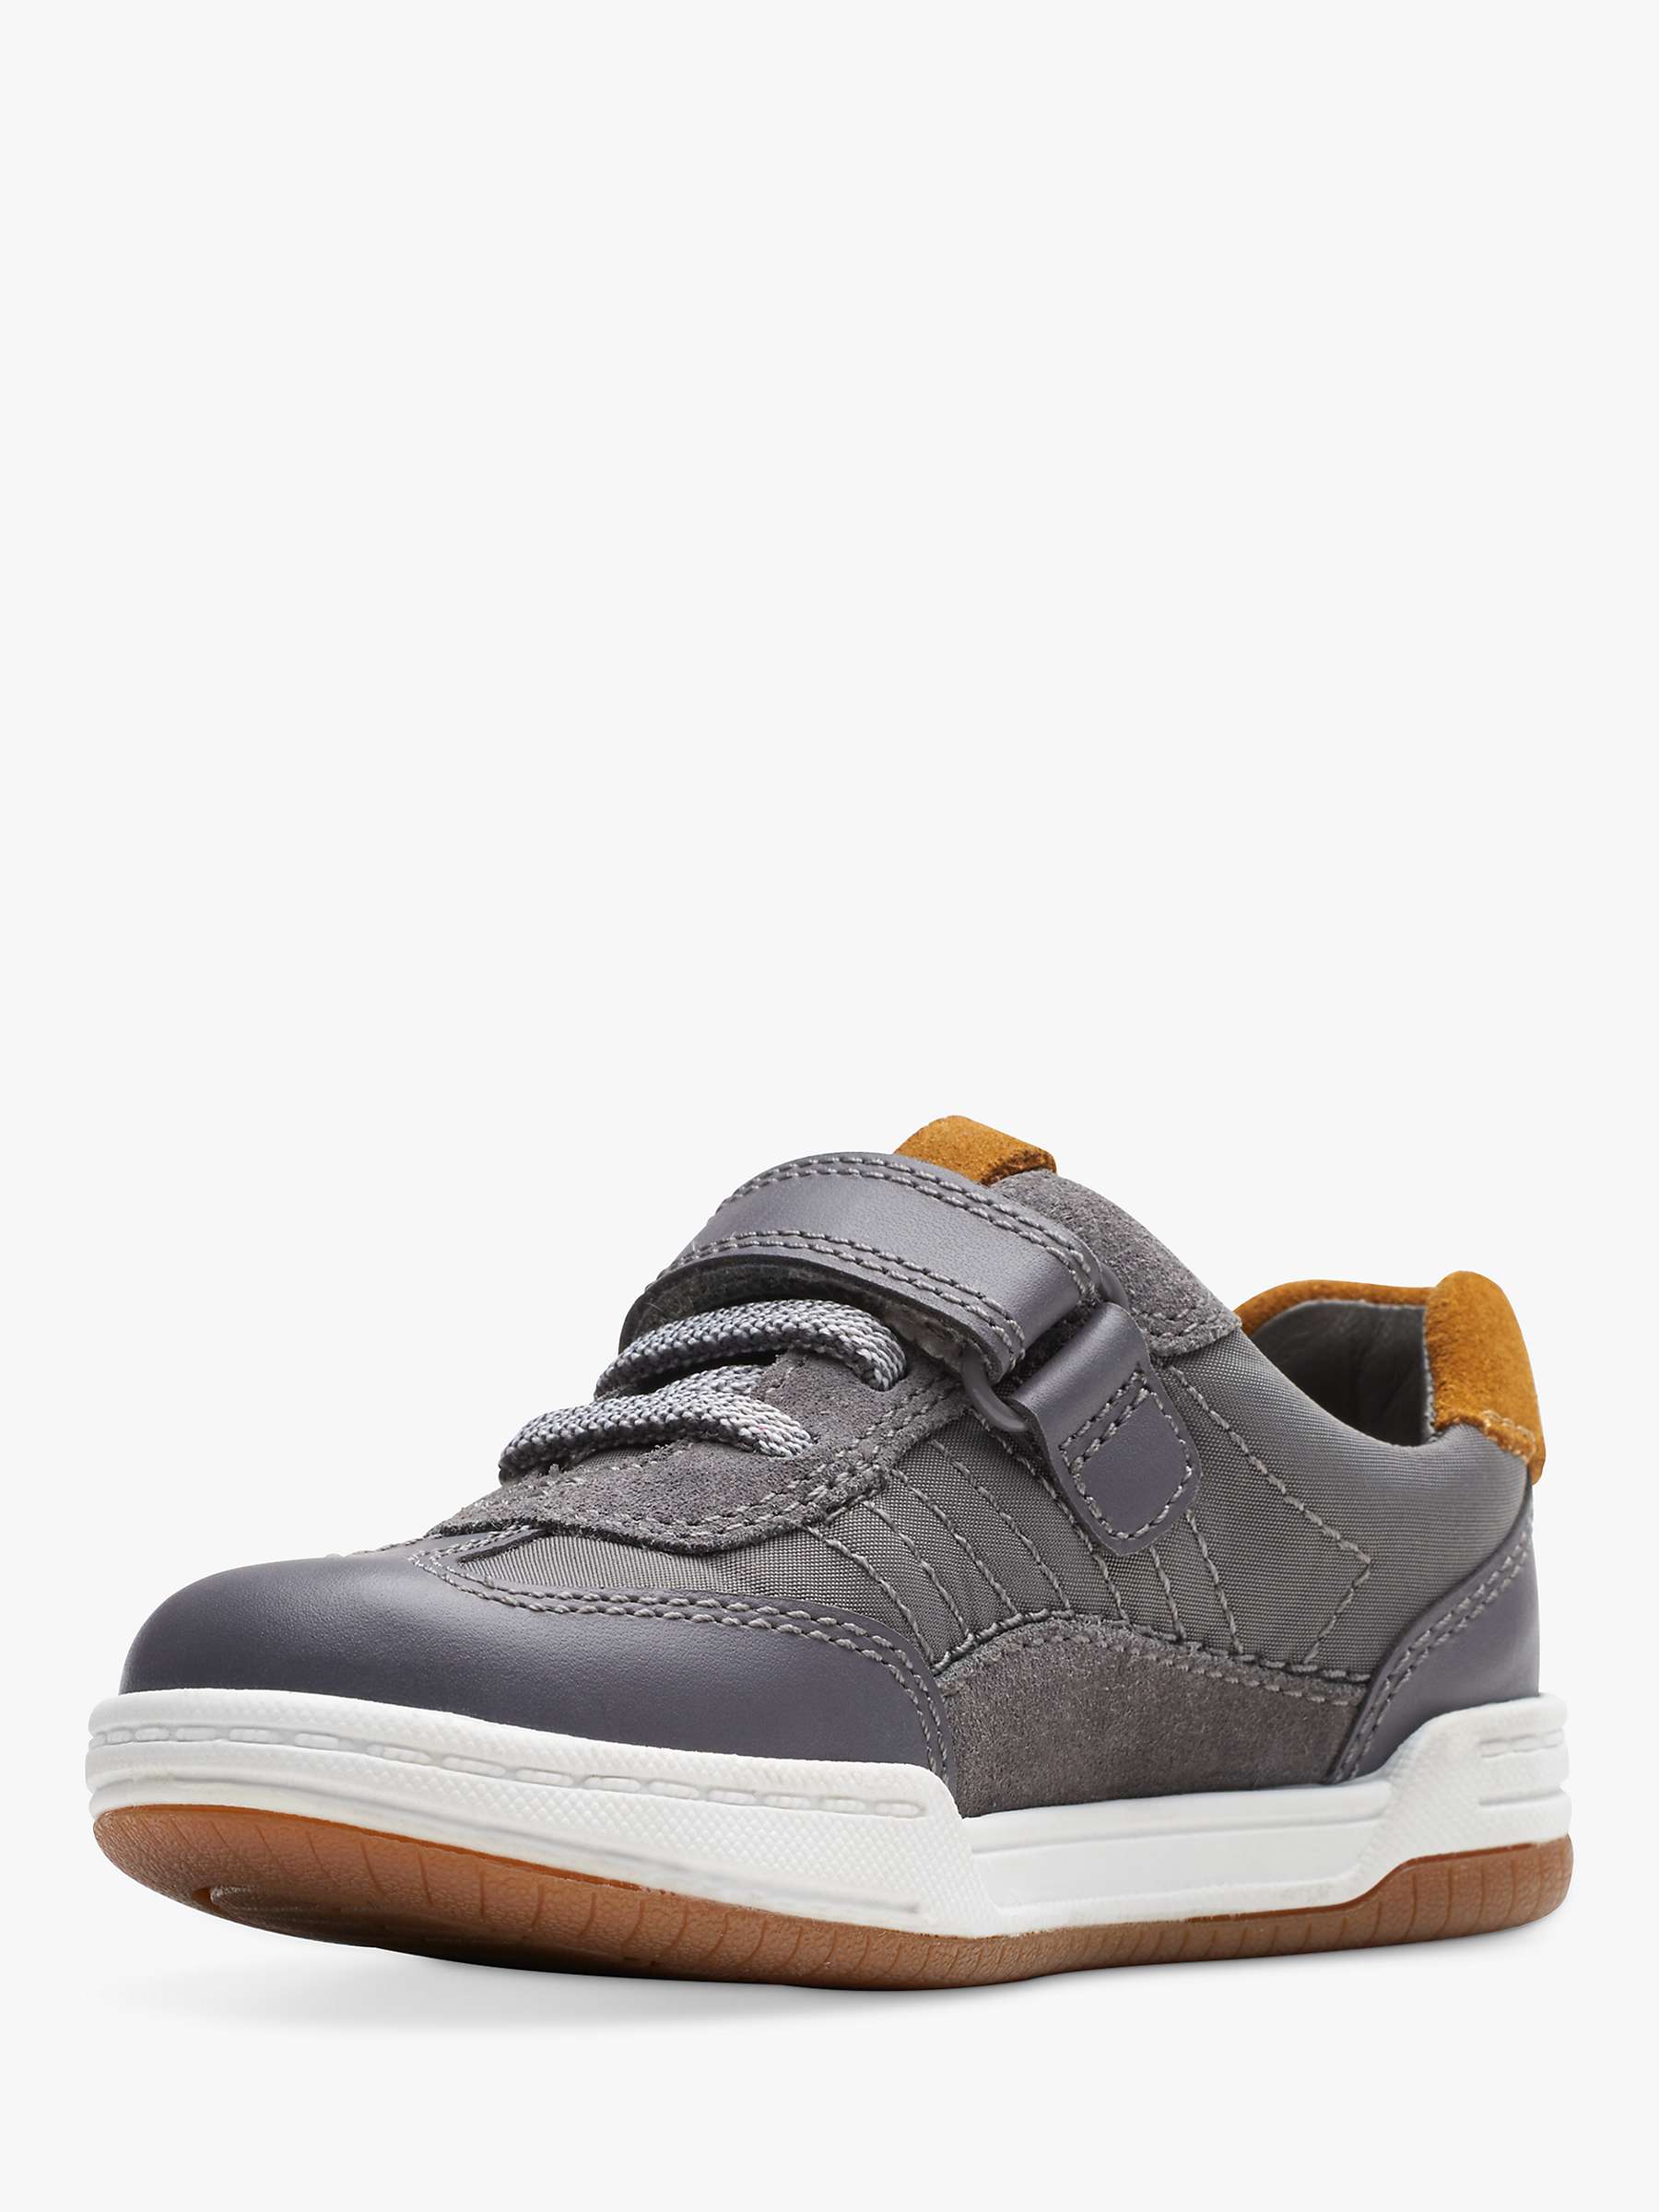 Buy Clarks Kids' Fawn Family Trainers Online at johnlewis.com